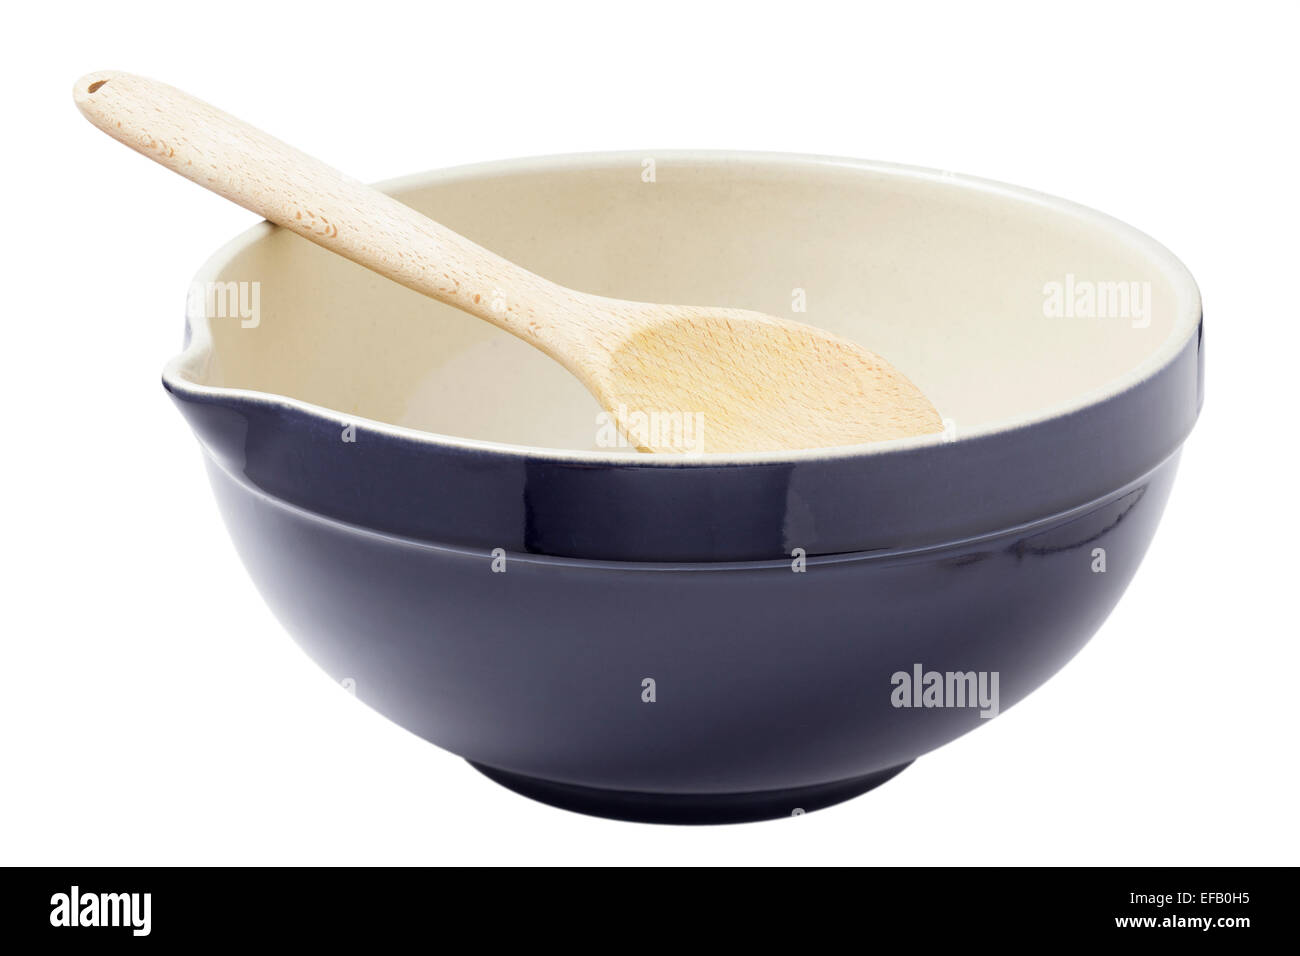 https://c8.alamy.com/comp/EFB0H5/mixing-bowl-and-wooden-spoon-EFB0H5.jpg